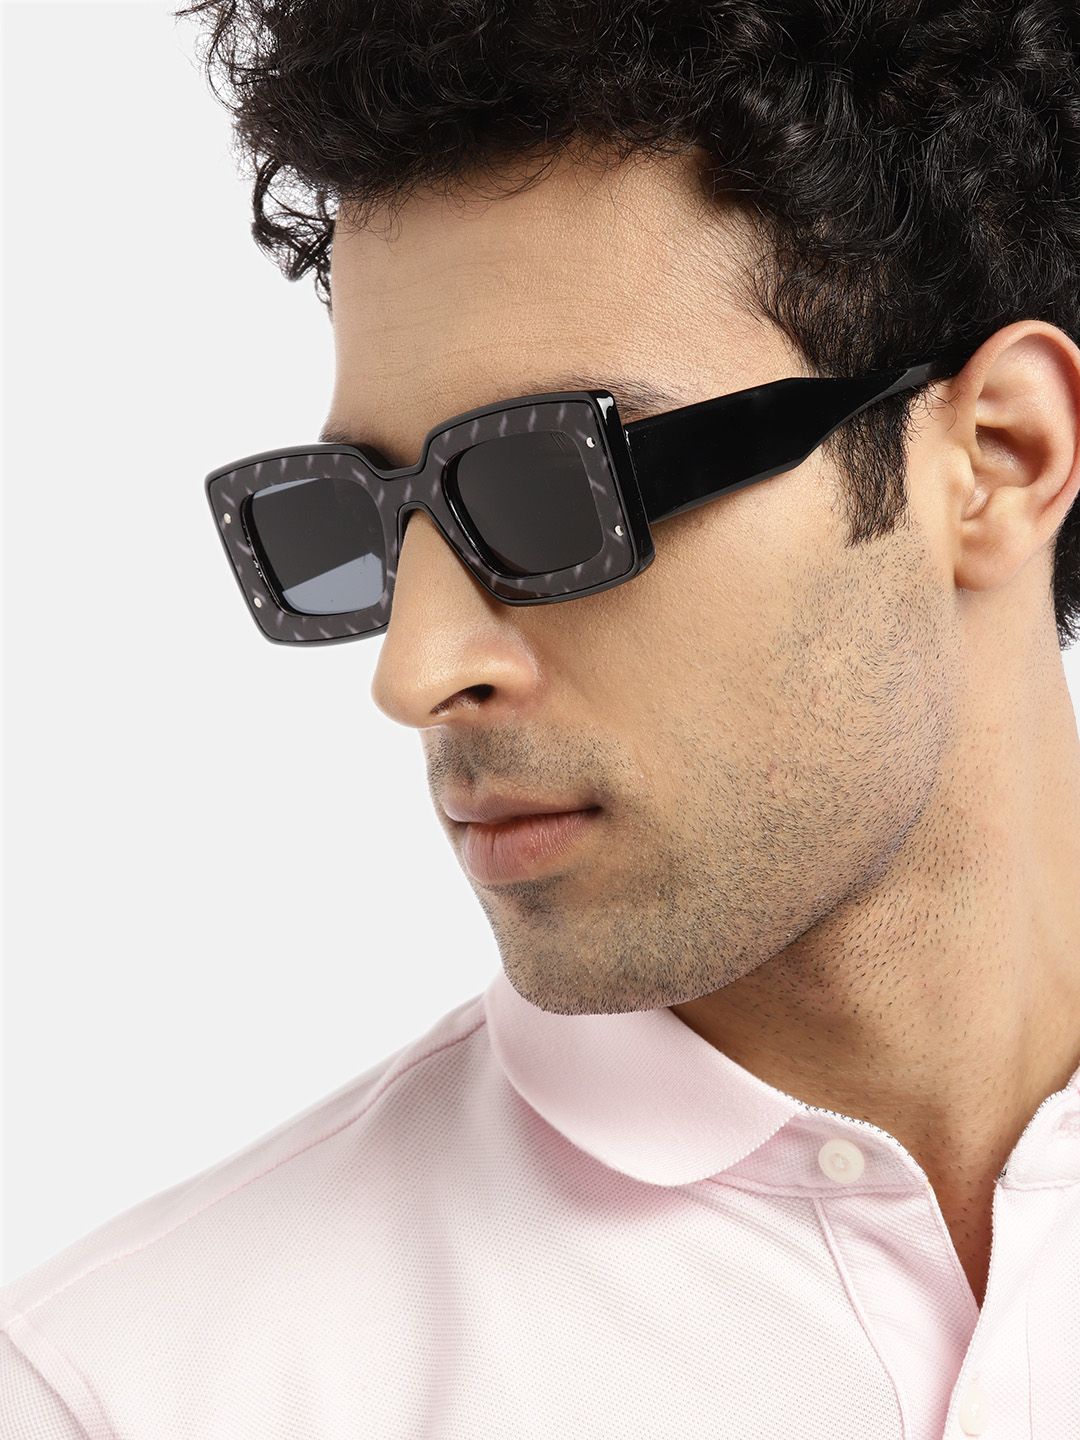 Voyage Unisex Black Lens & Black Square Sunglasses with UV Protected Lens Price in India